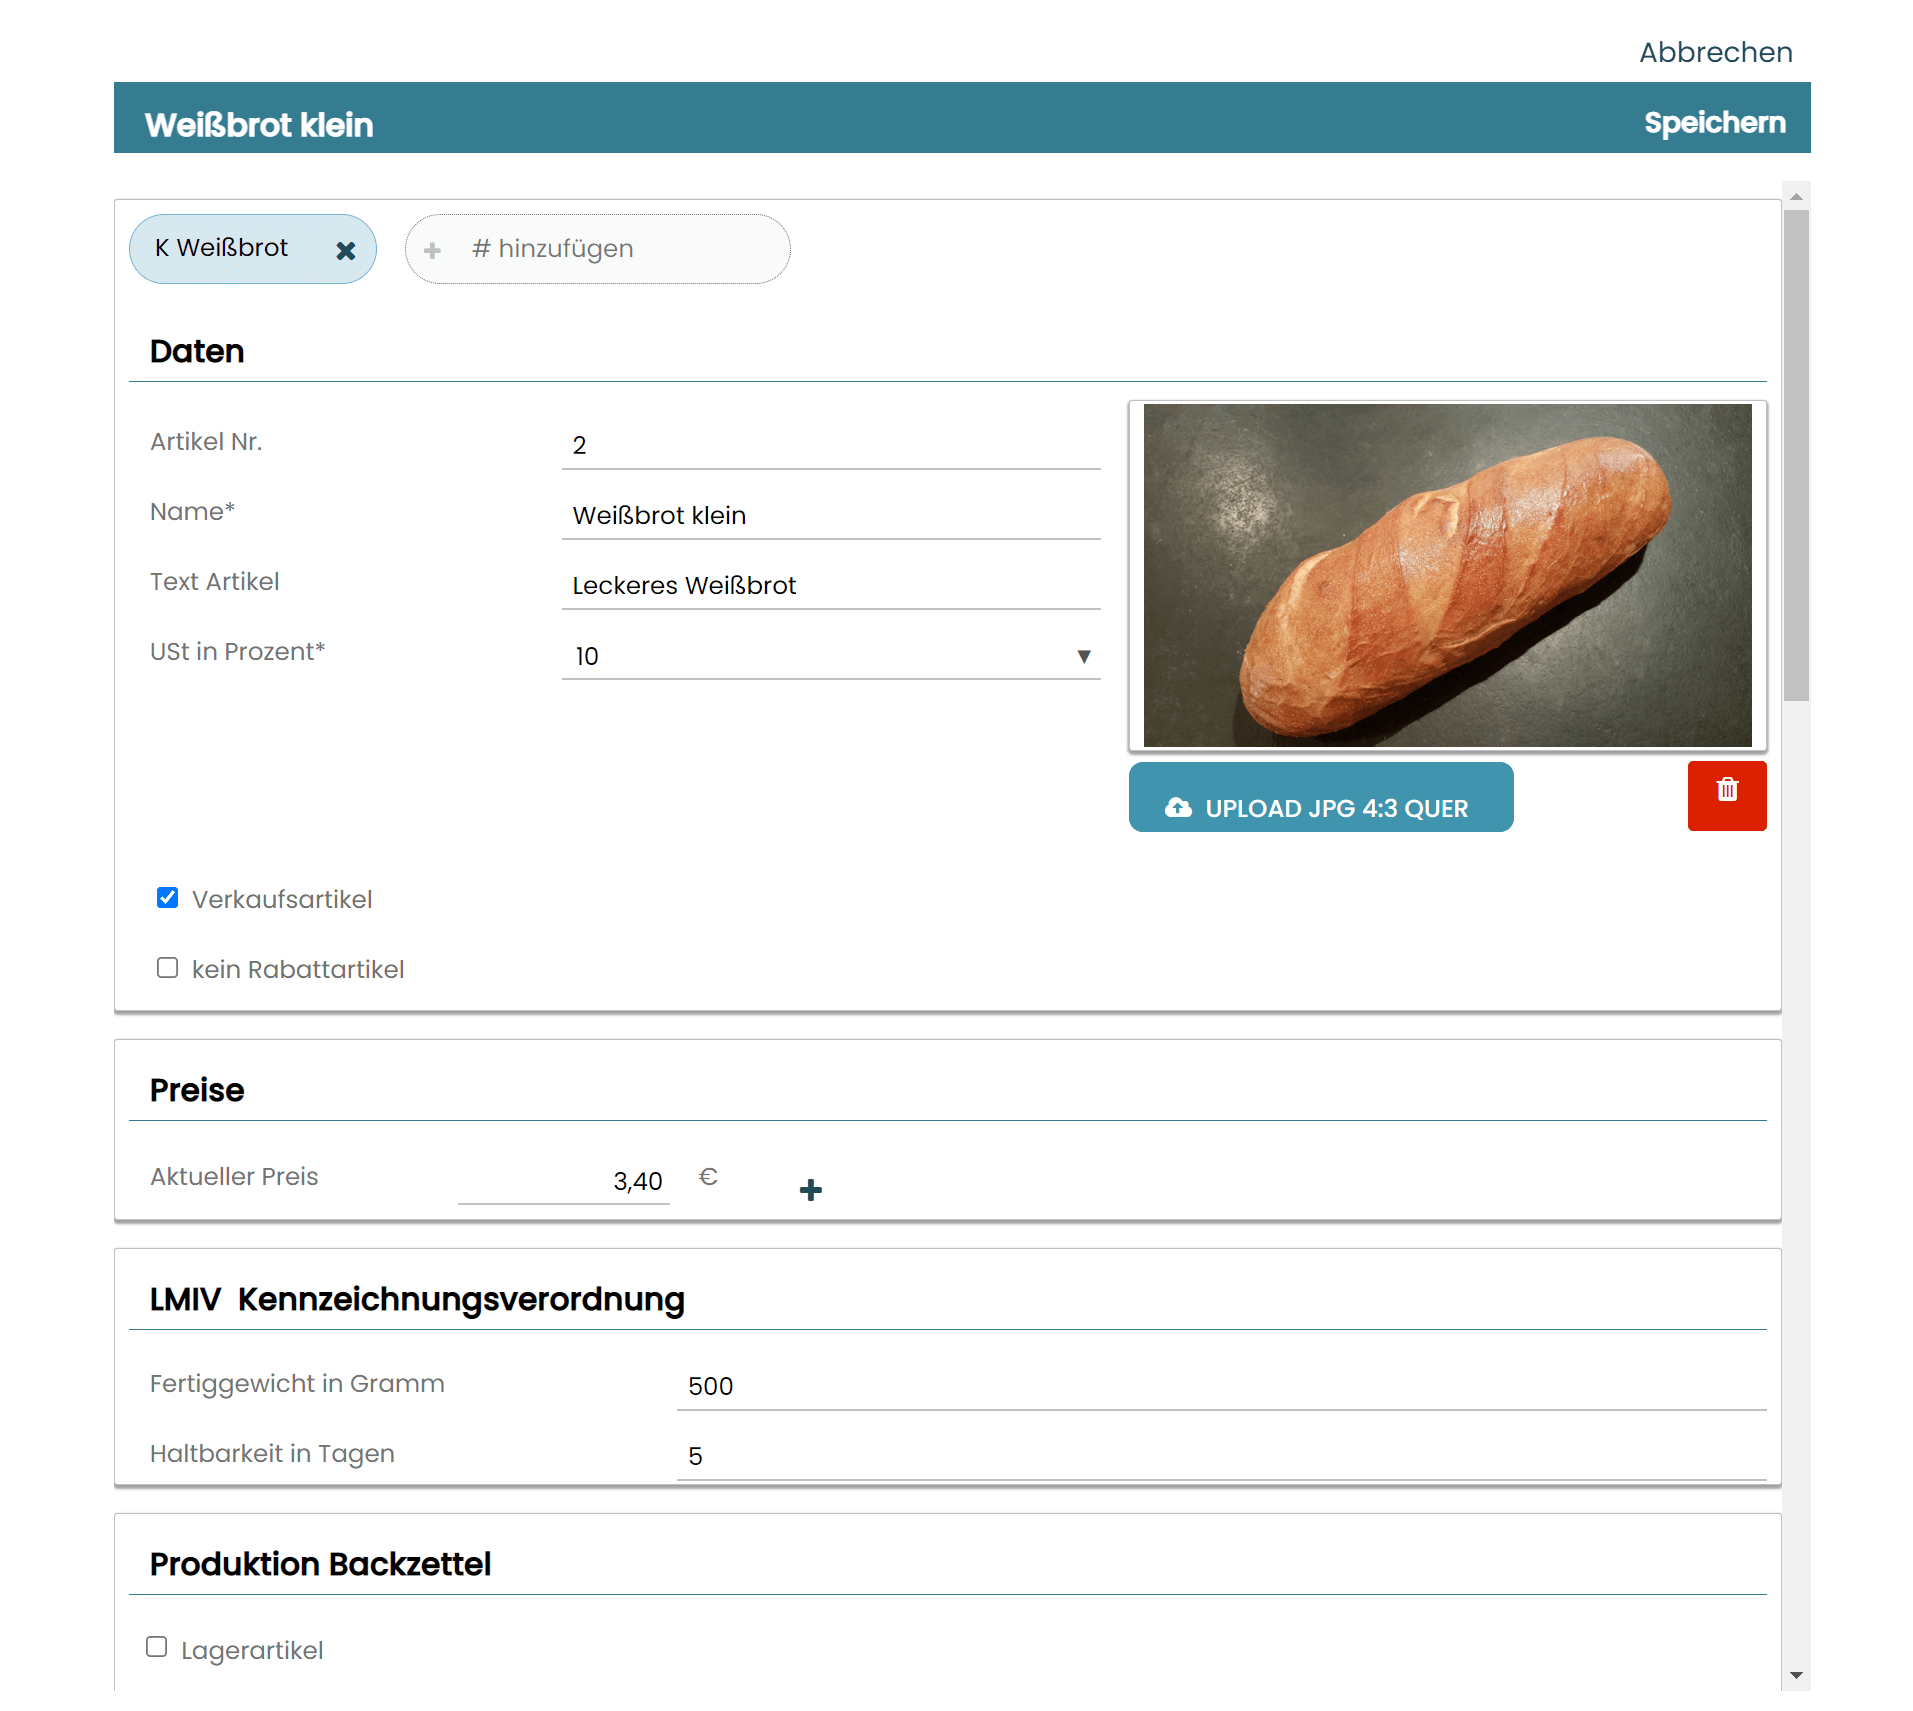 Updating product inventories with Mark.One Bakery